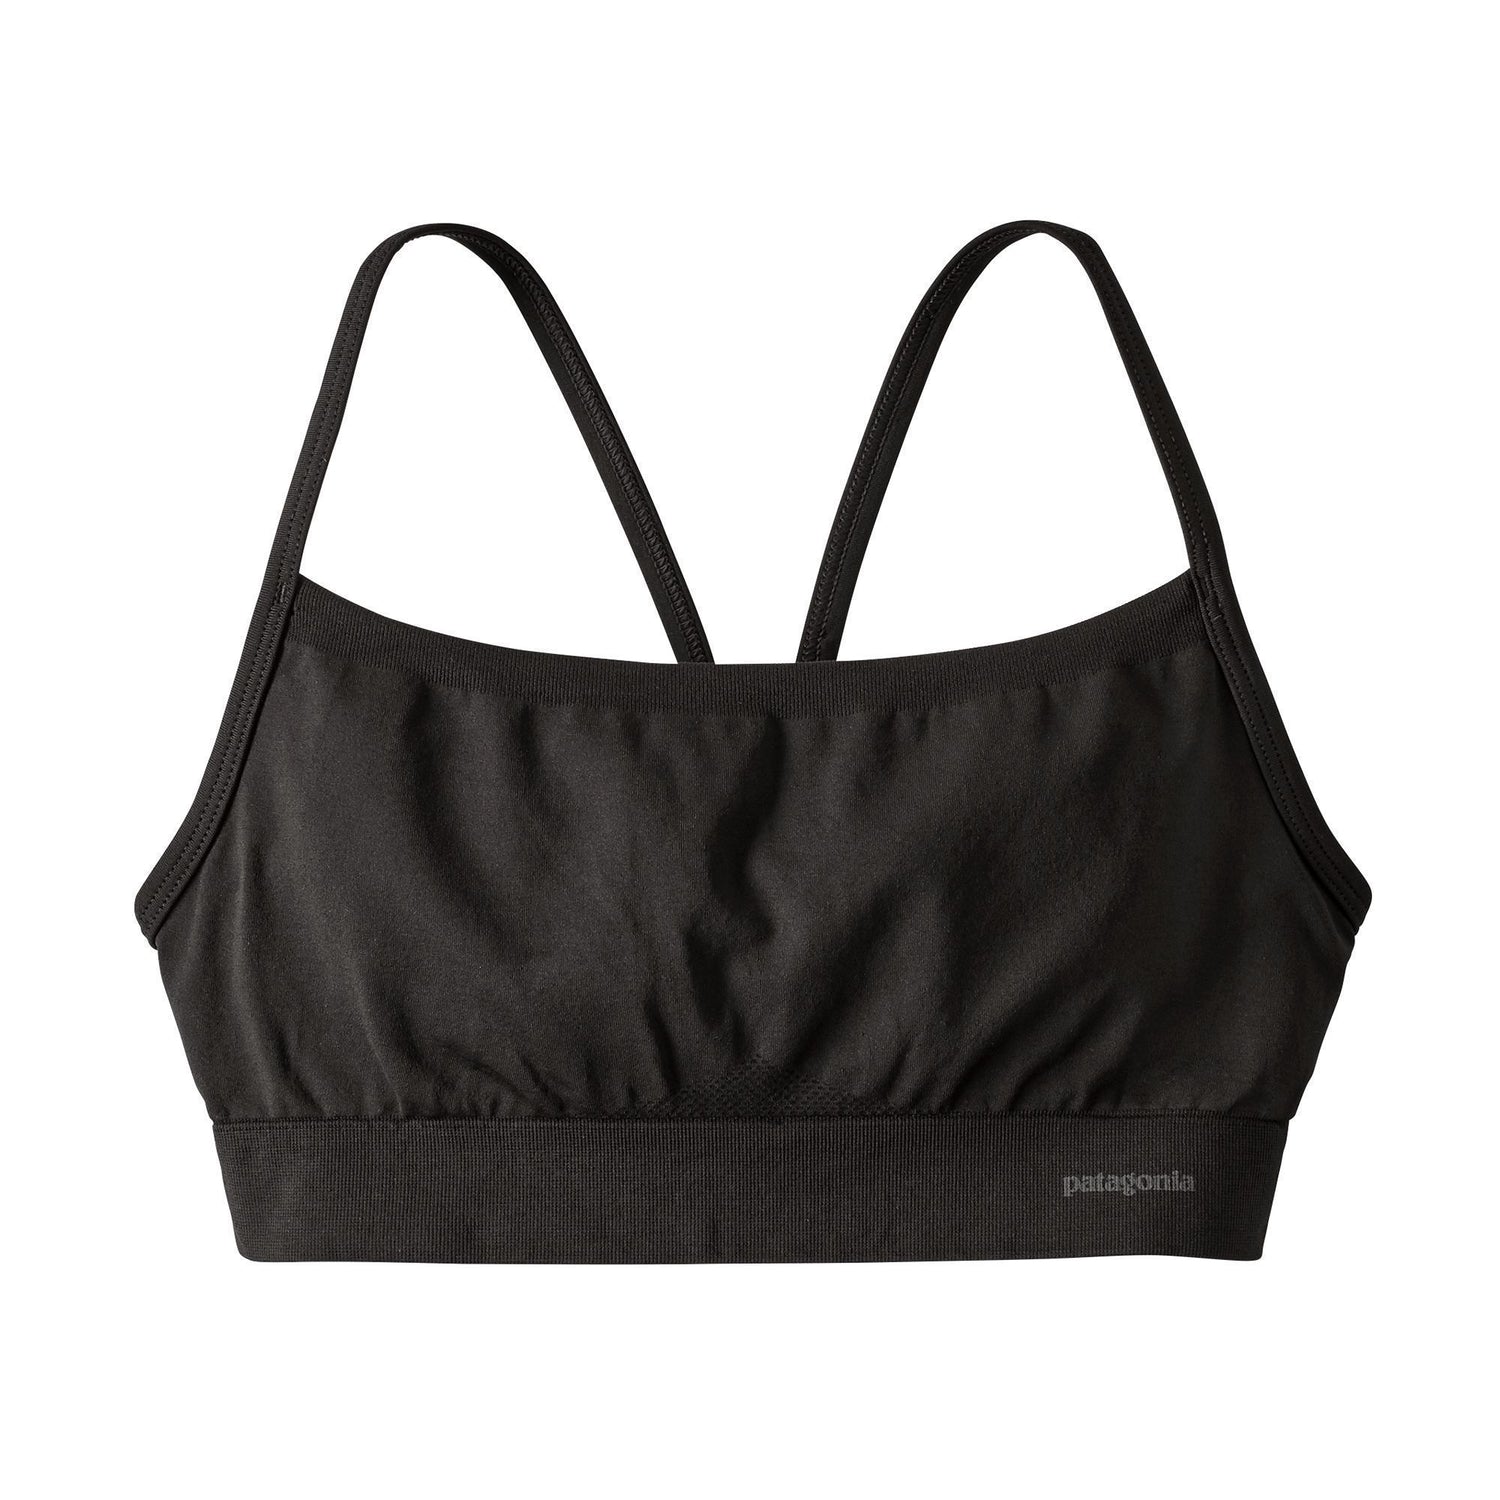 Patagonia Active Mesh Bra - Recycled Polyester Black Underwear